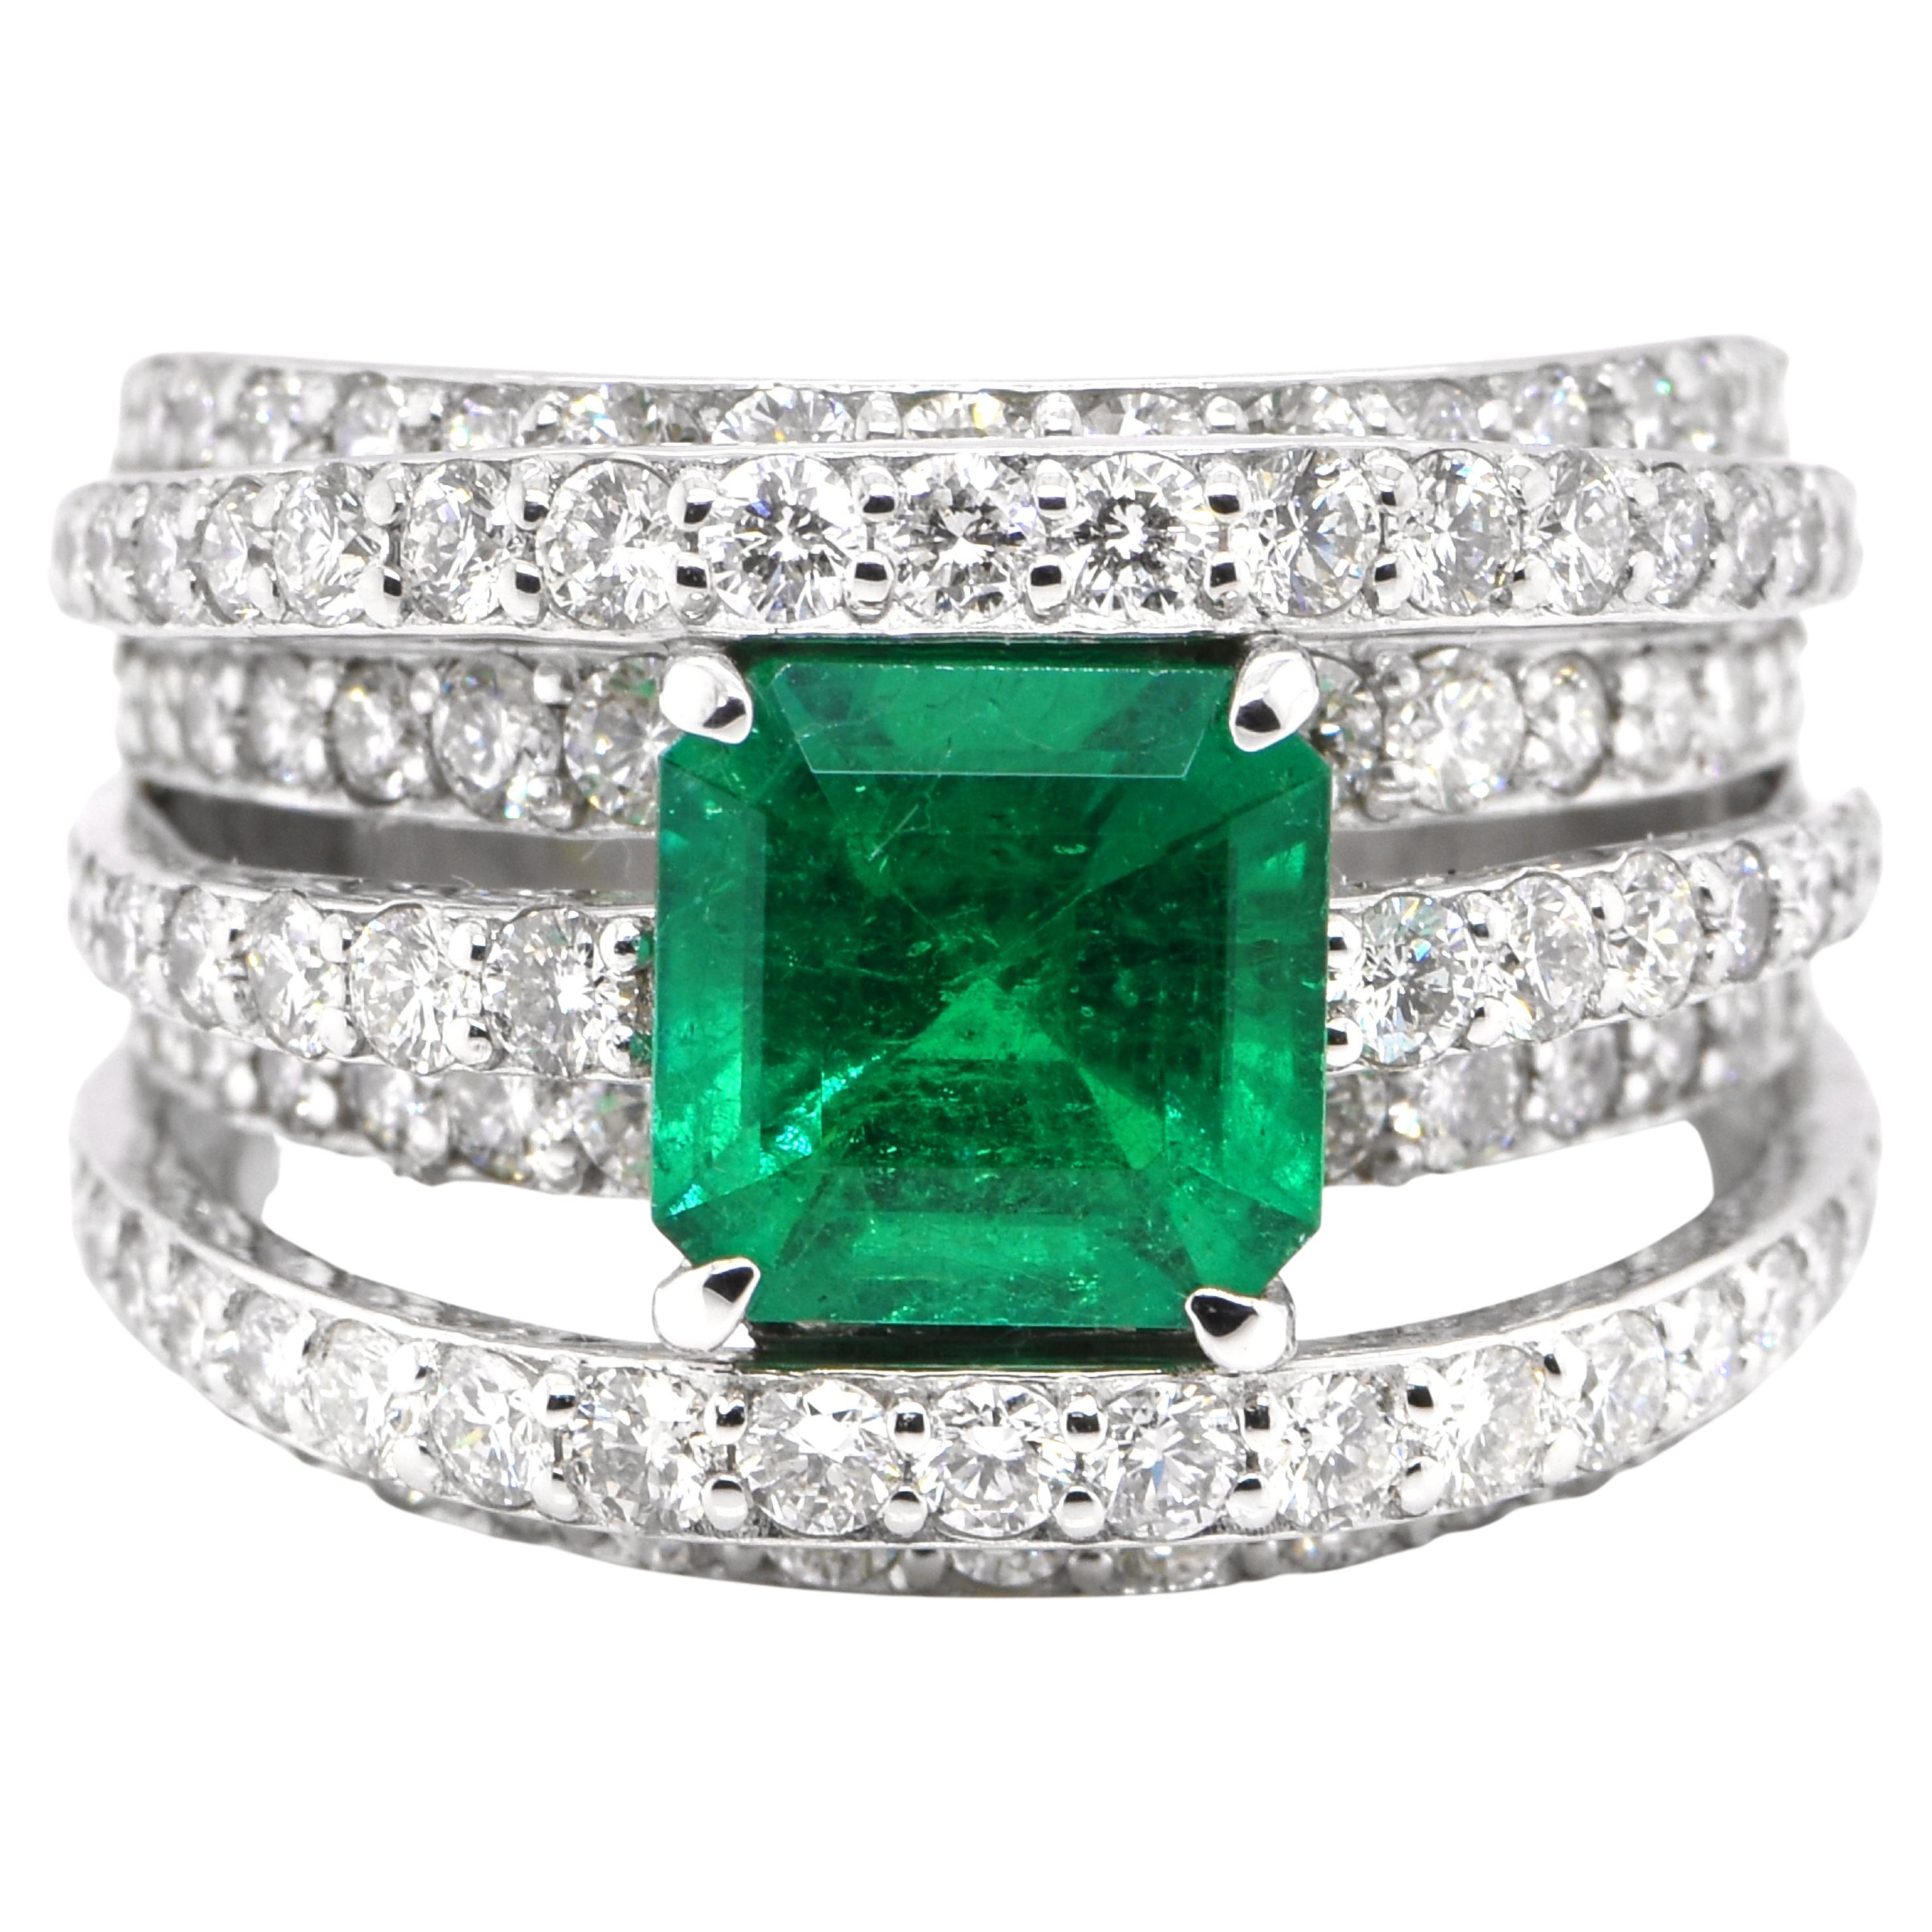 1.66 Carat Colombian, Muzo Color Emerald & Diamond Cocktail Ring Set in Platinum For Sale